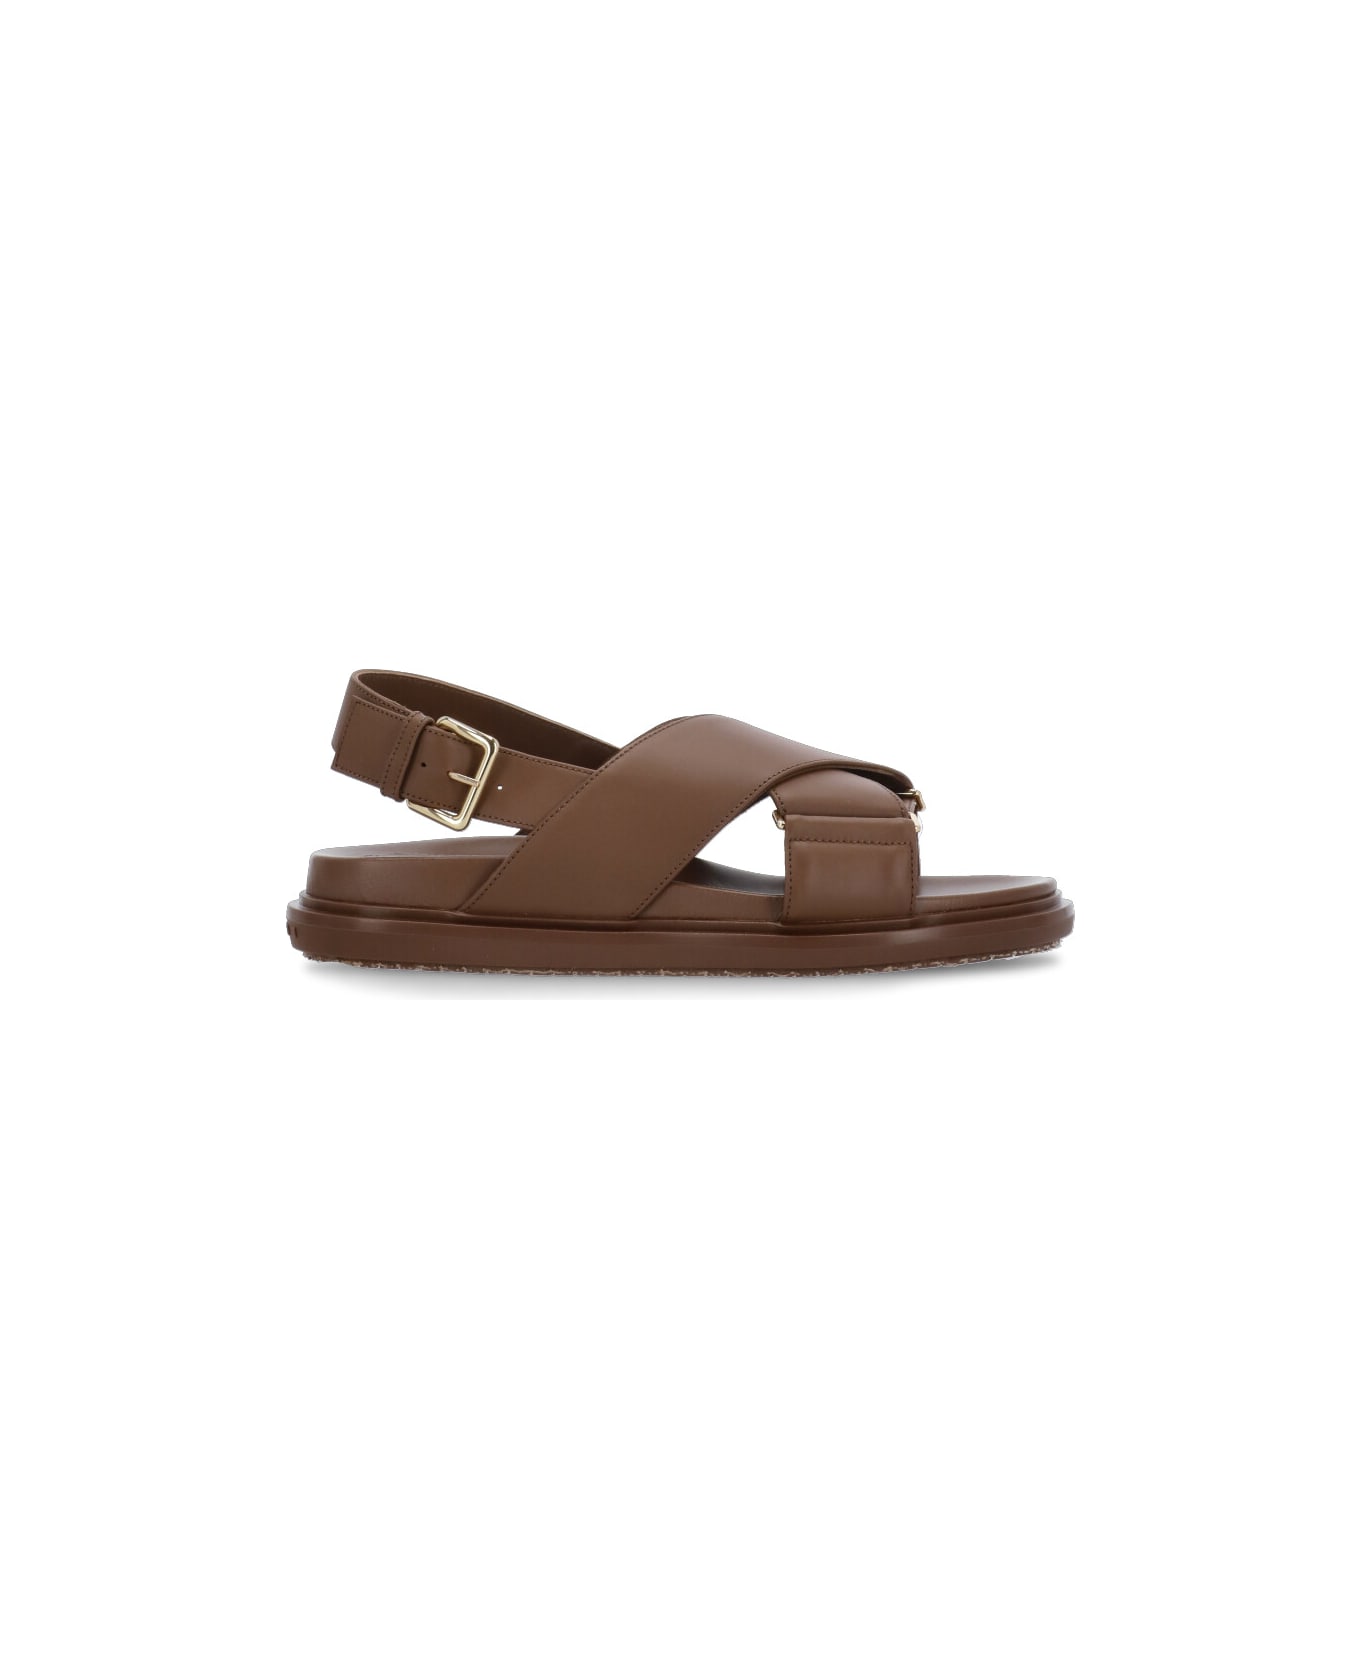 Marni Leather Sandals - Brown